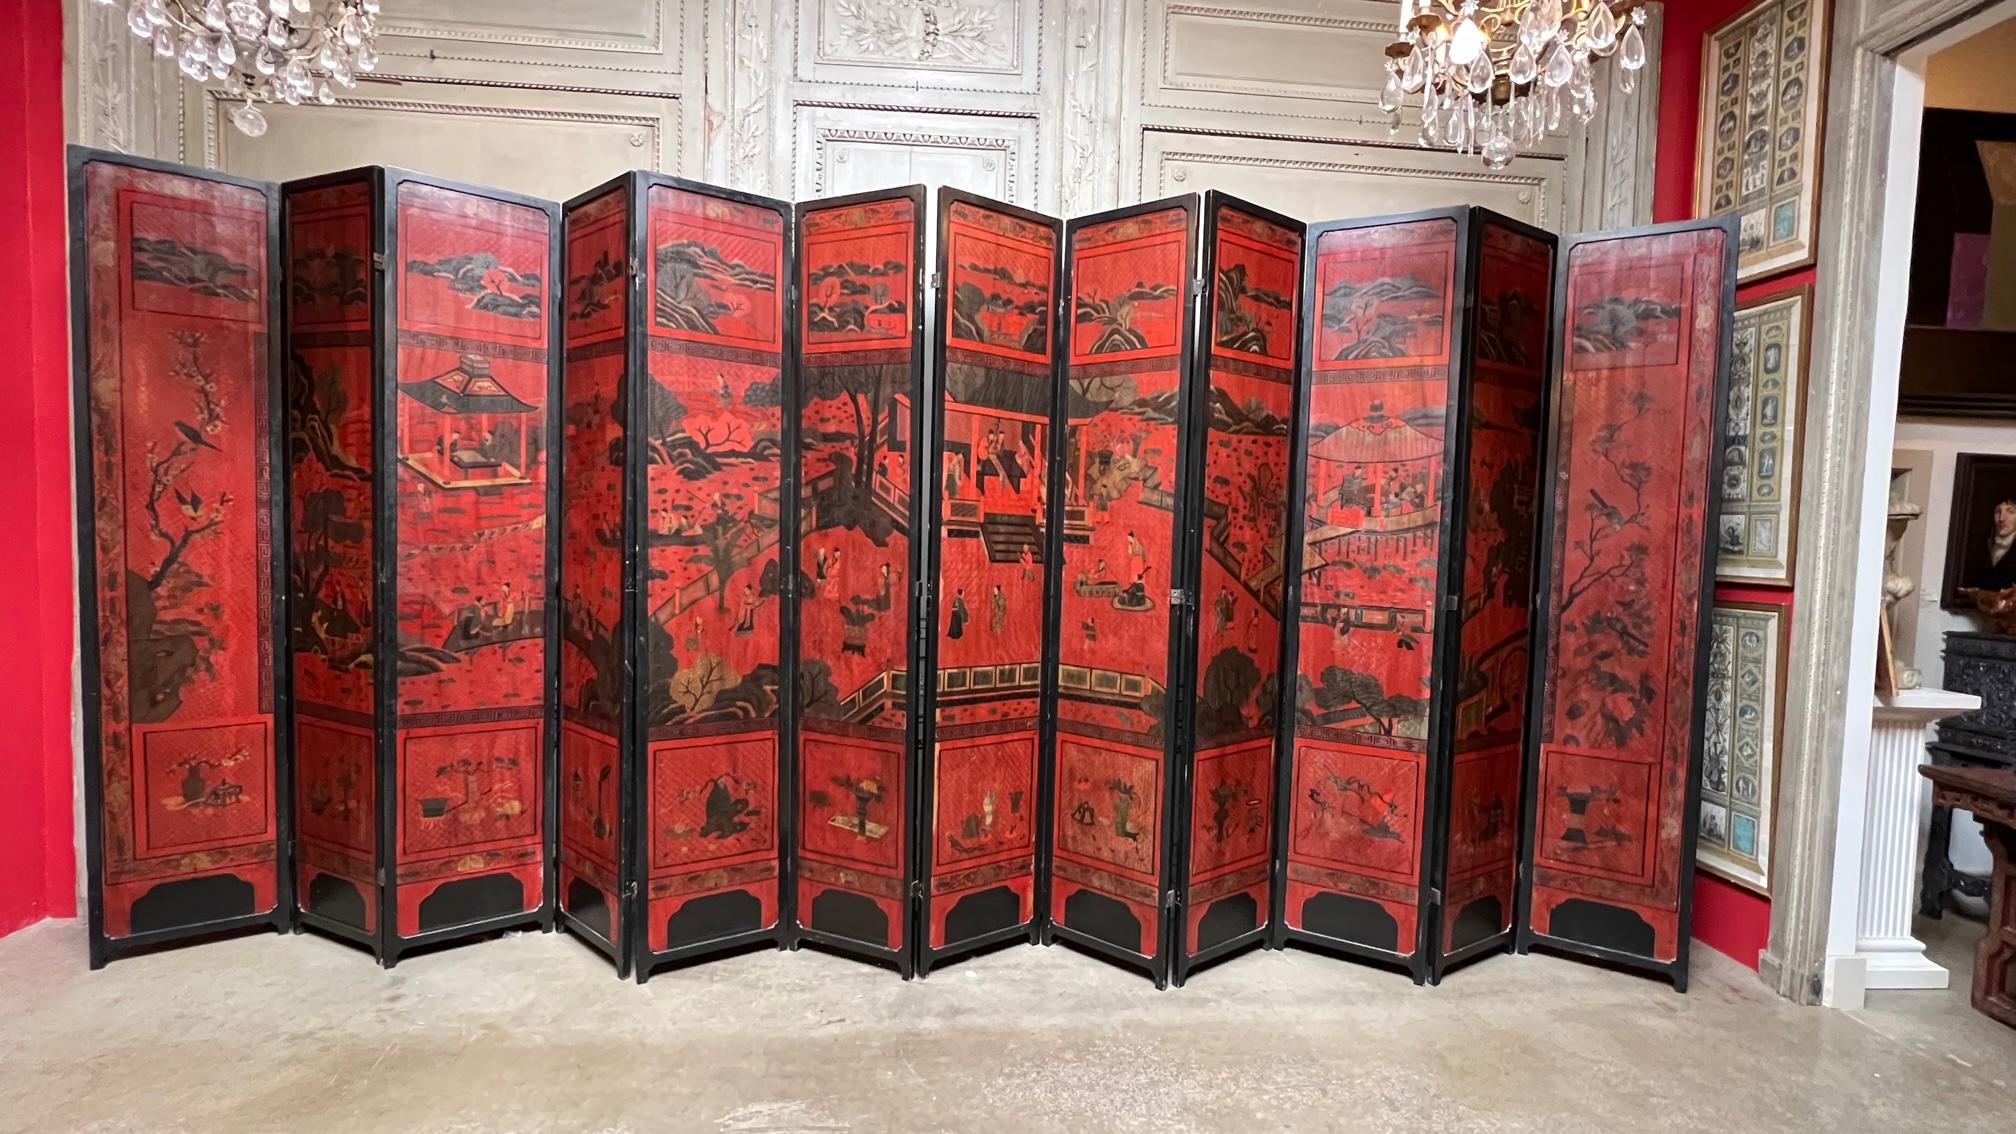 A very large and beautiful Chinese Coromandal 12 panel folding screen with an overal etched and carved surface of fretwork court scenes, animals and flowers. 
This screen is in a wonderful Chinese red with black lacquer framing. It is finished